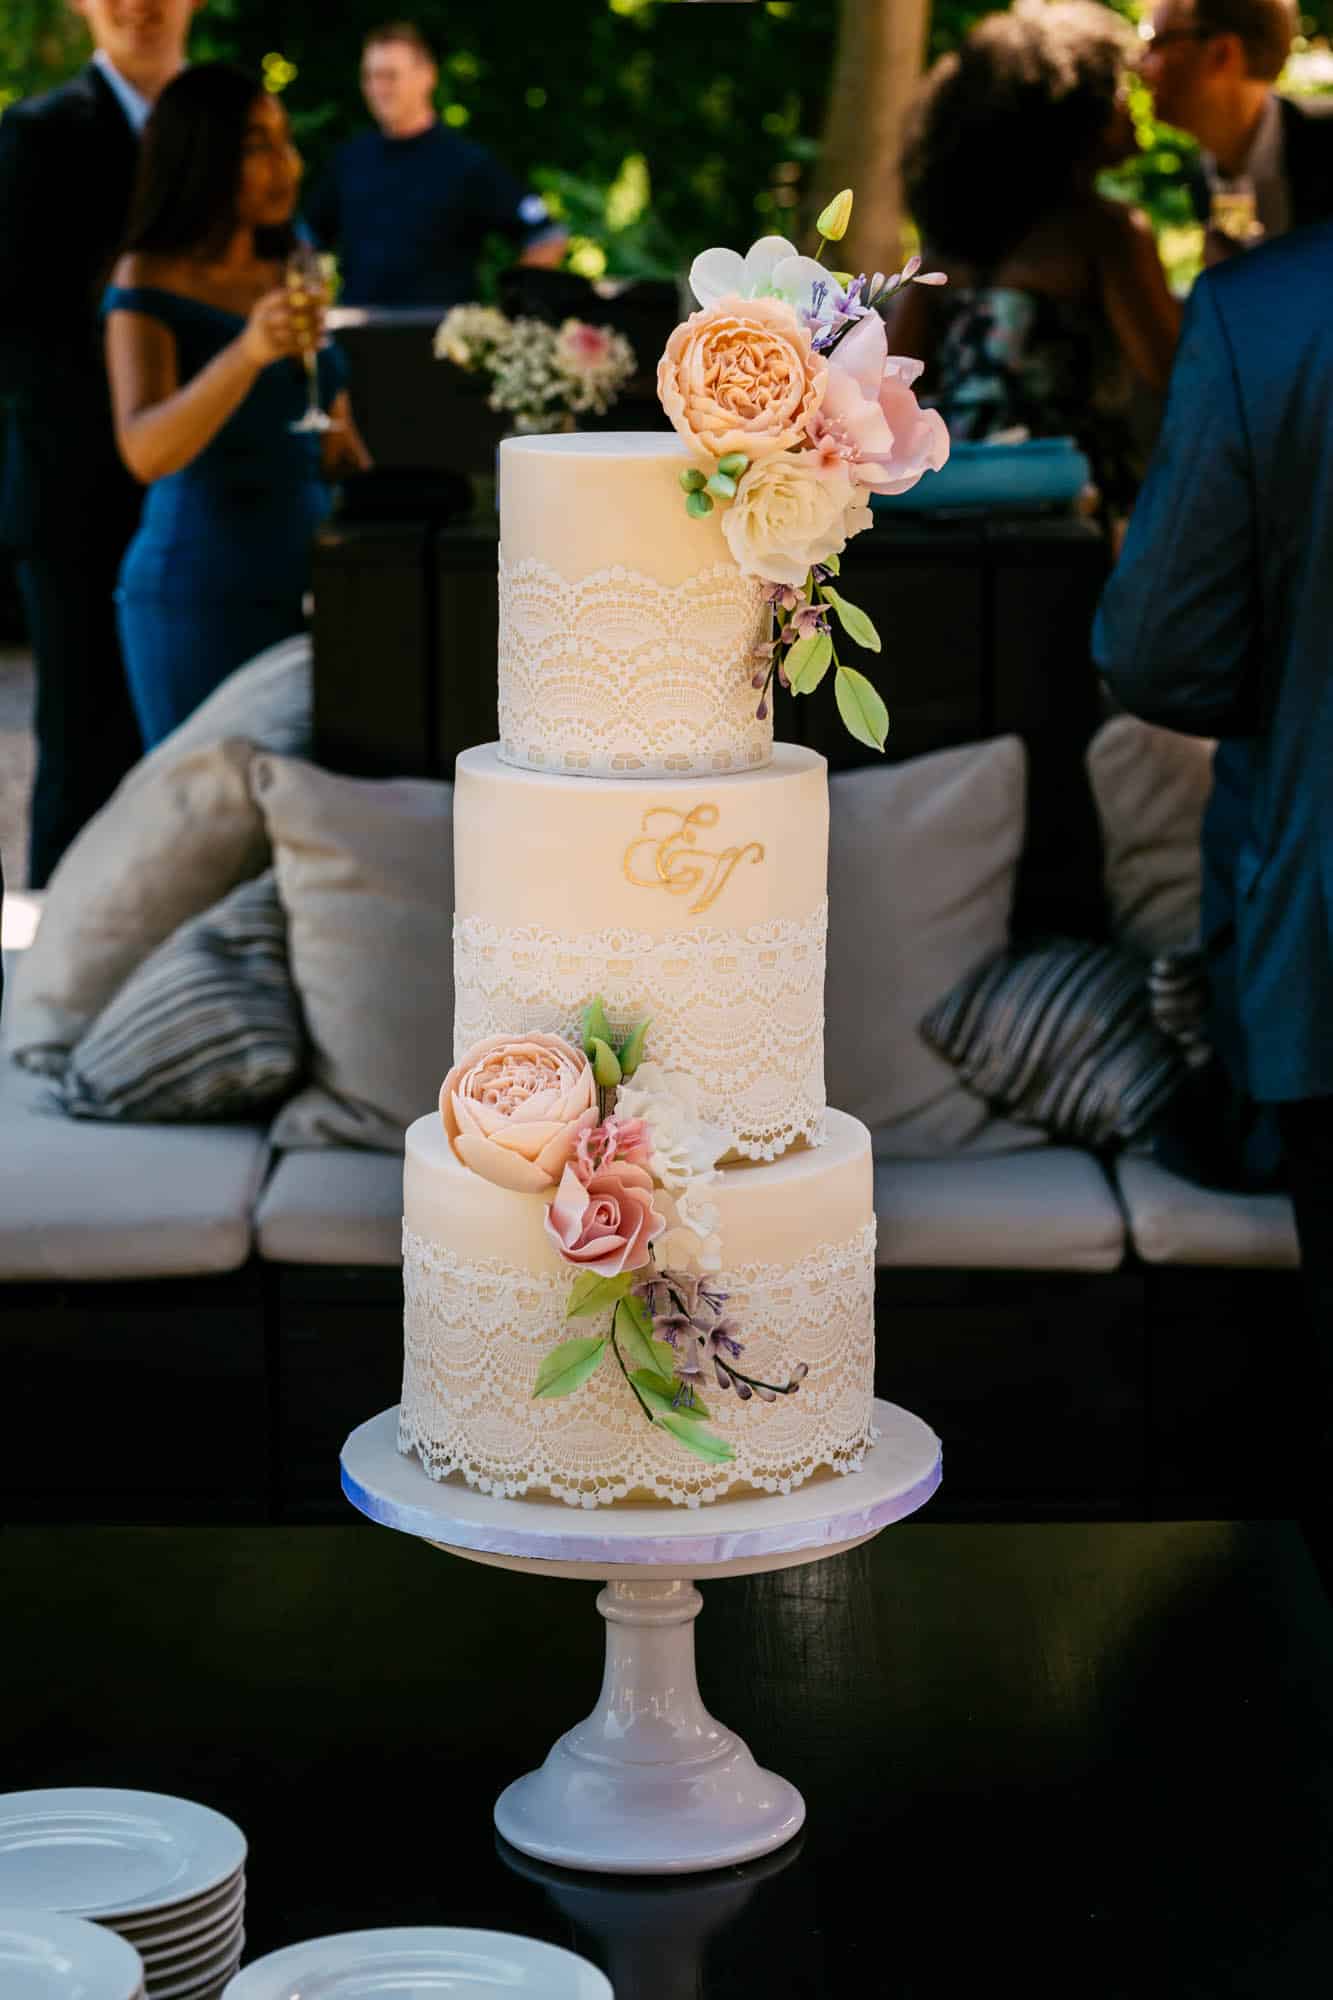 A three-tiered wedding cake stands on a table.